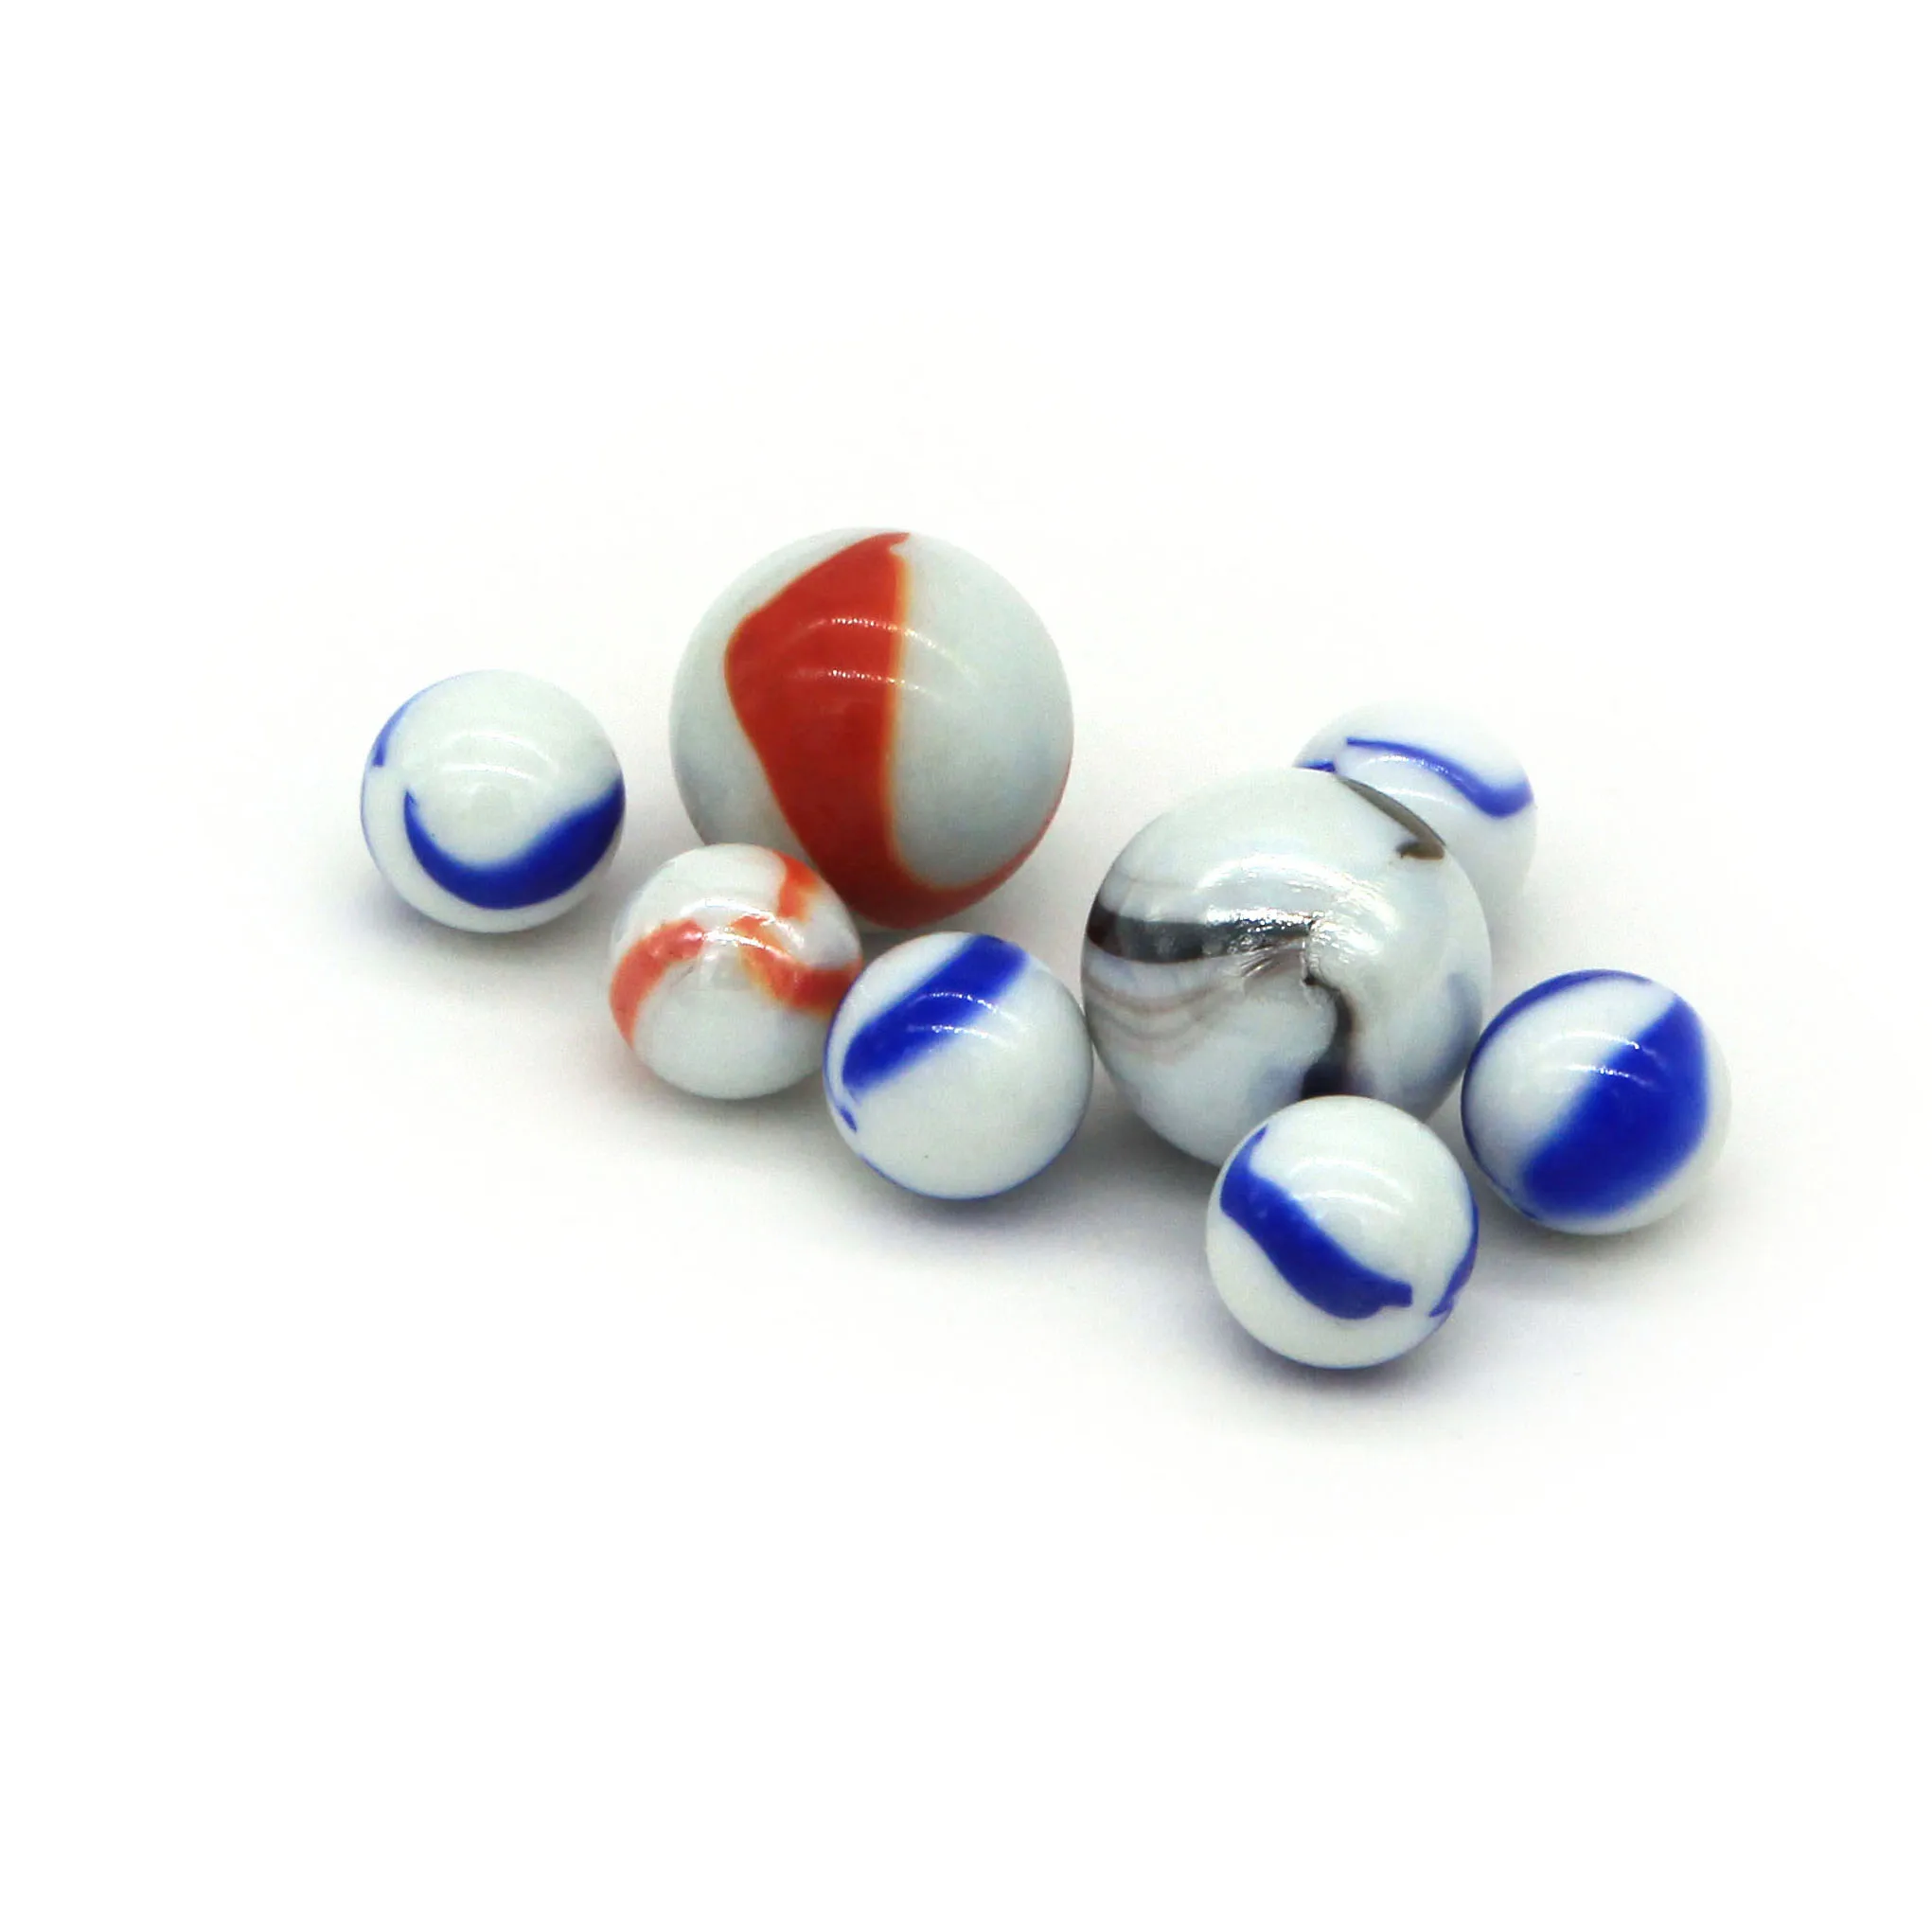 Round toy wholesale different color china glass marbles 2020